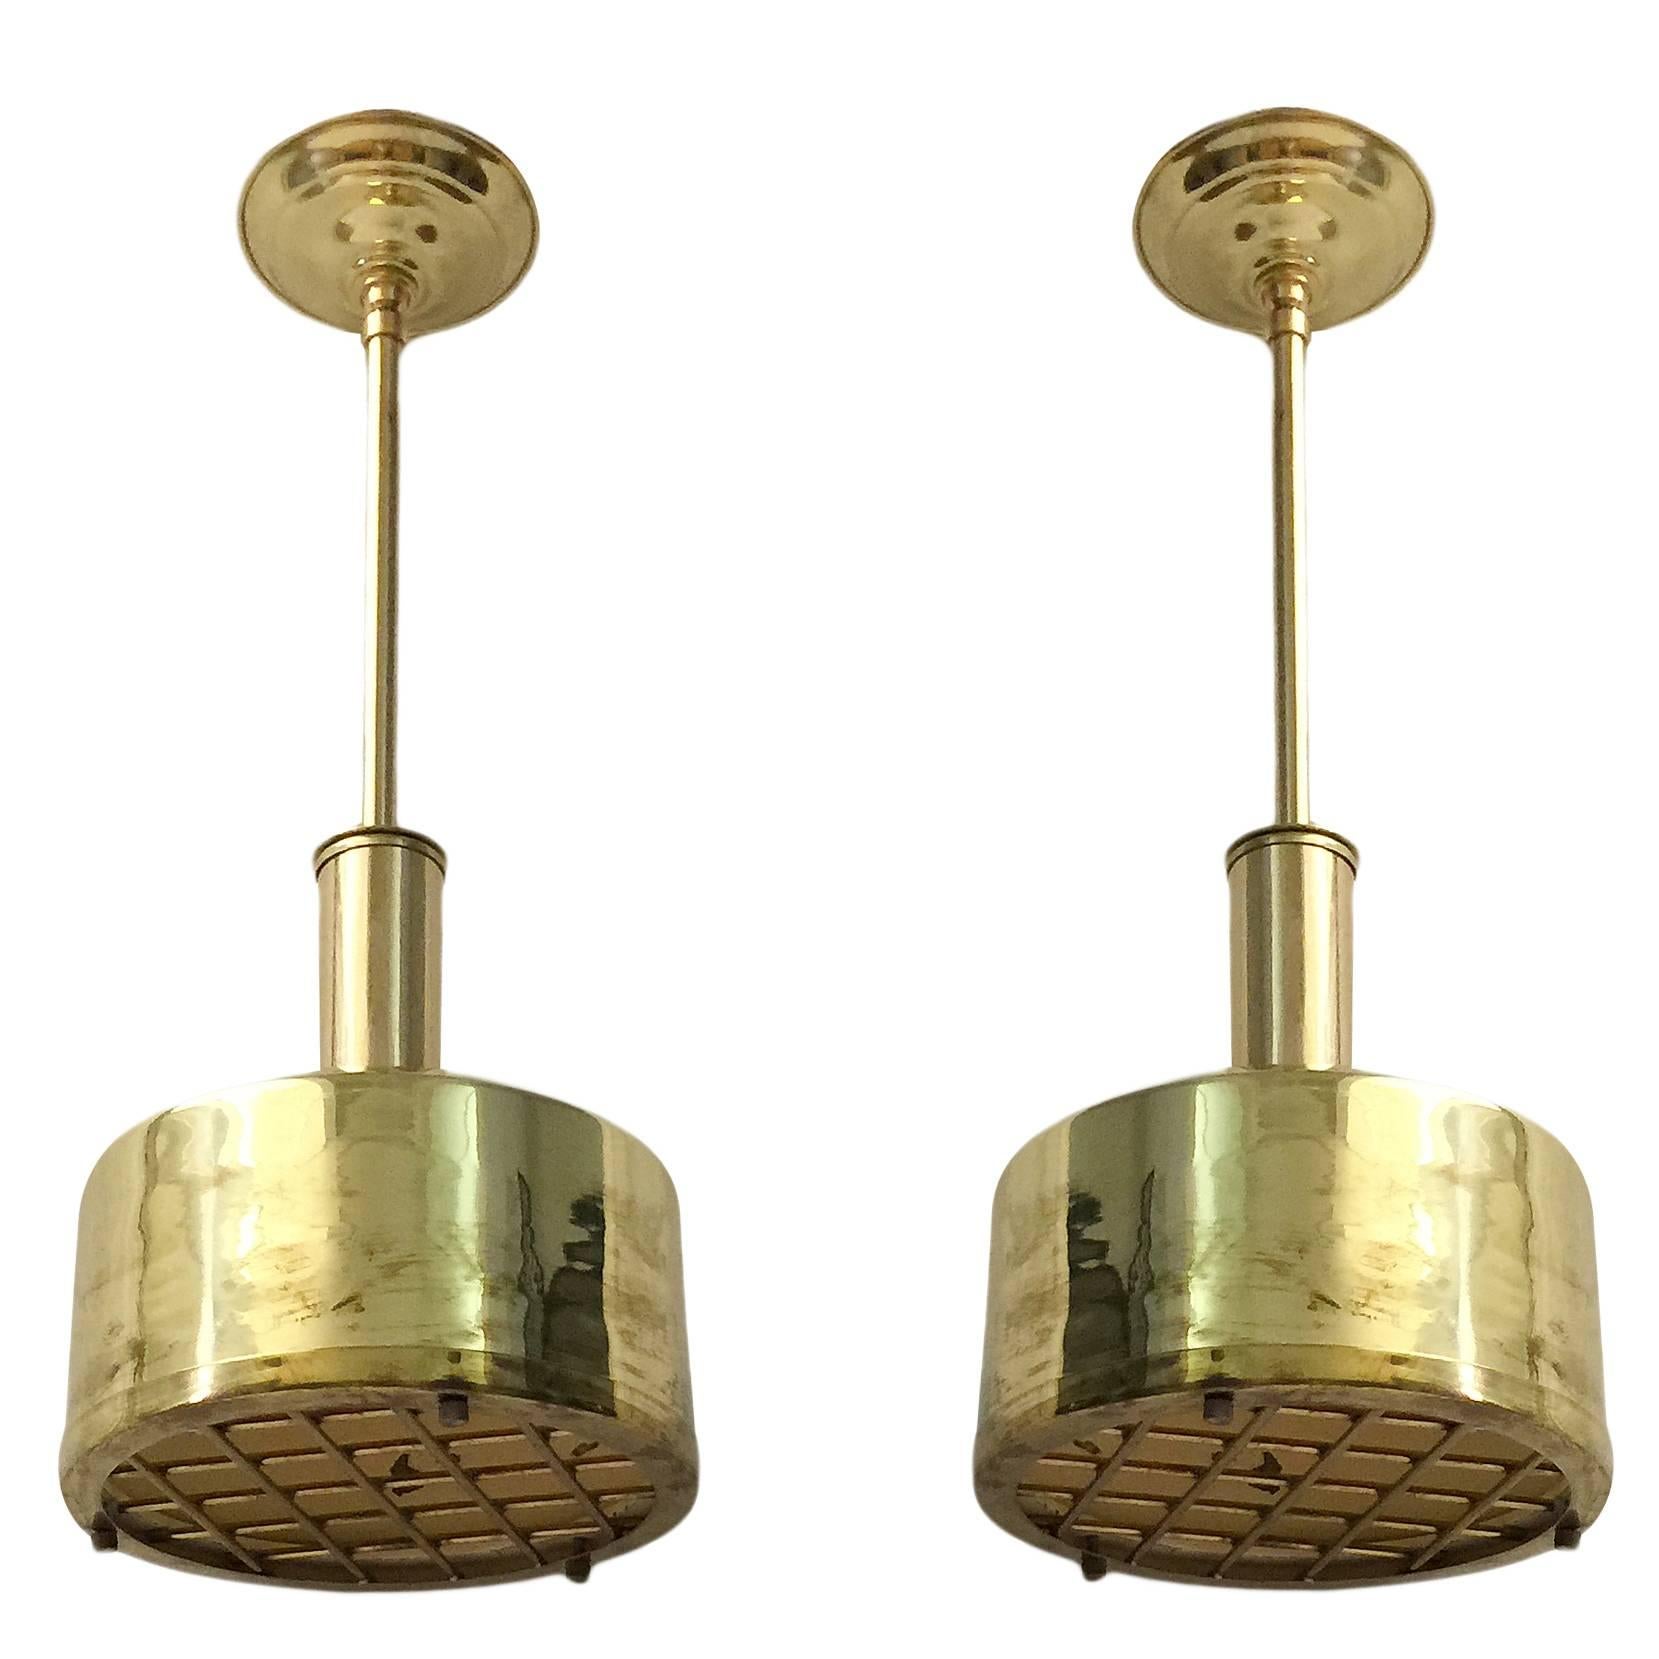 Set of fourteen midcentury Italian polished brass light fixtures, with an interior Edison light. Sold individually.

Measurements:
Diameter: 9.25